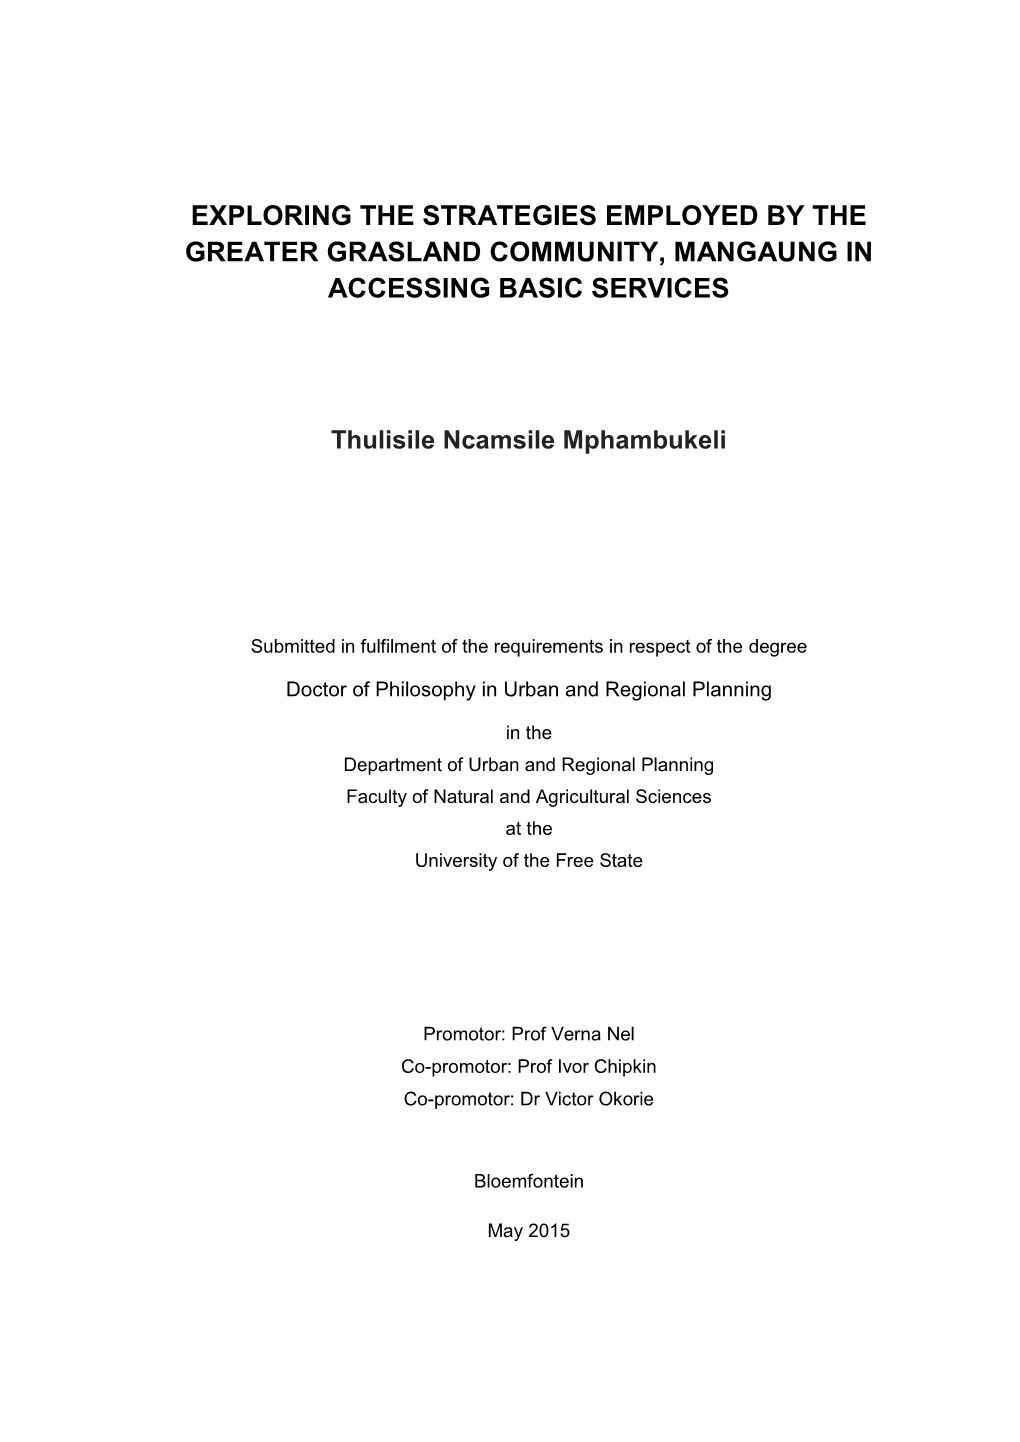 Doctorate of Philosophy in Urban and Regional Planning Dissertation 2015